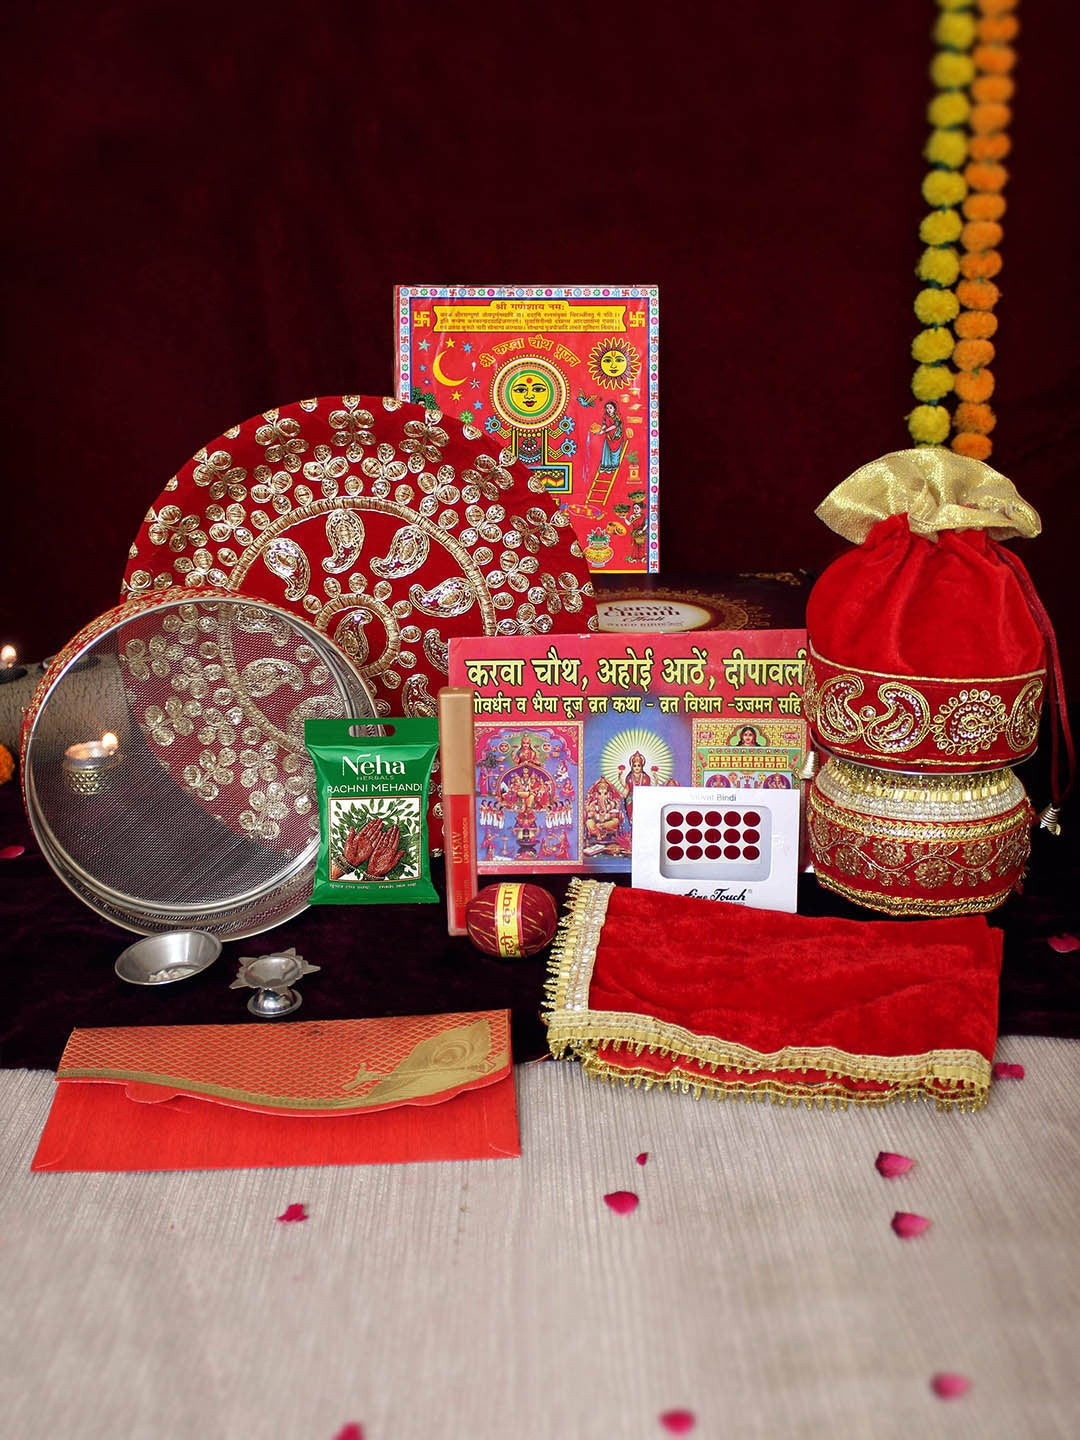 Top 10 Karwa Chauth Gifts for Mother in Law